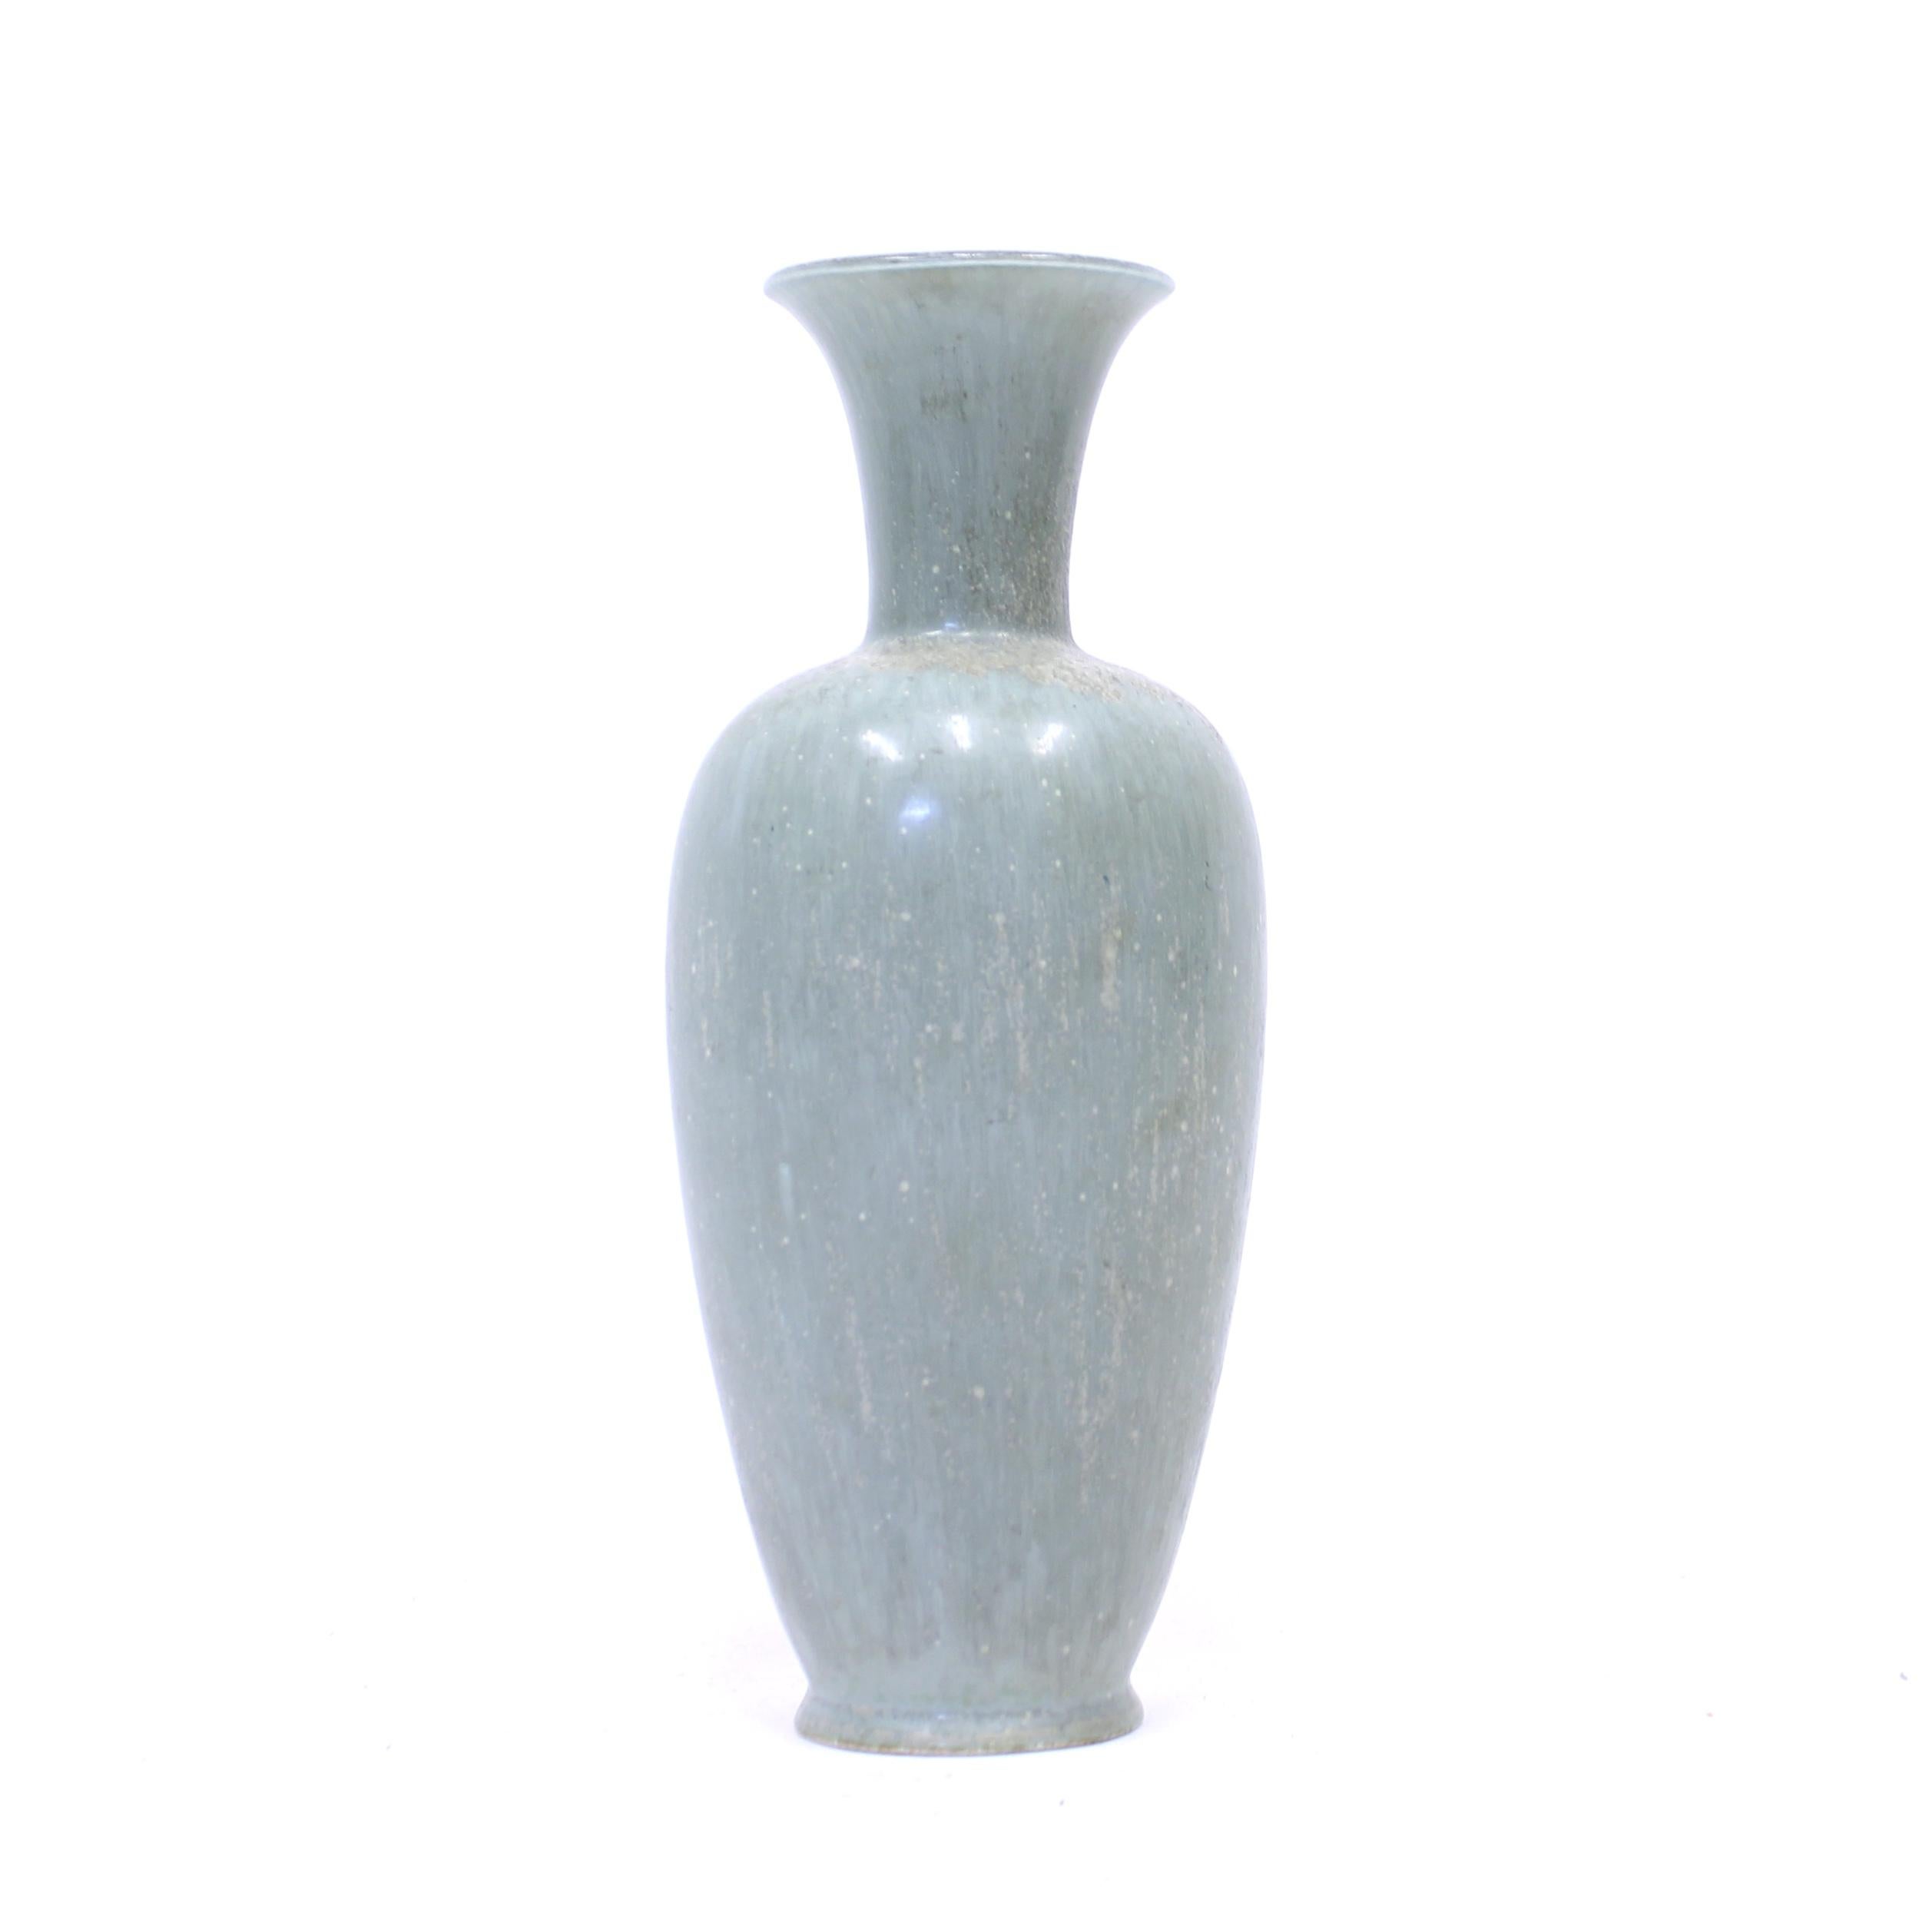 Large light green stoneware vase designed by Gunnar Nylund for Rörstrand in the 1950s. This glaze and size of 32 cm in height was produced as a special commission for Swedish soap manufacturer 